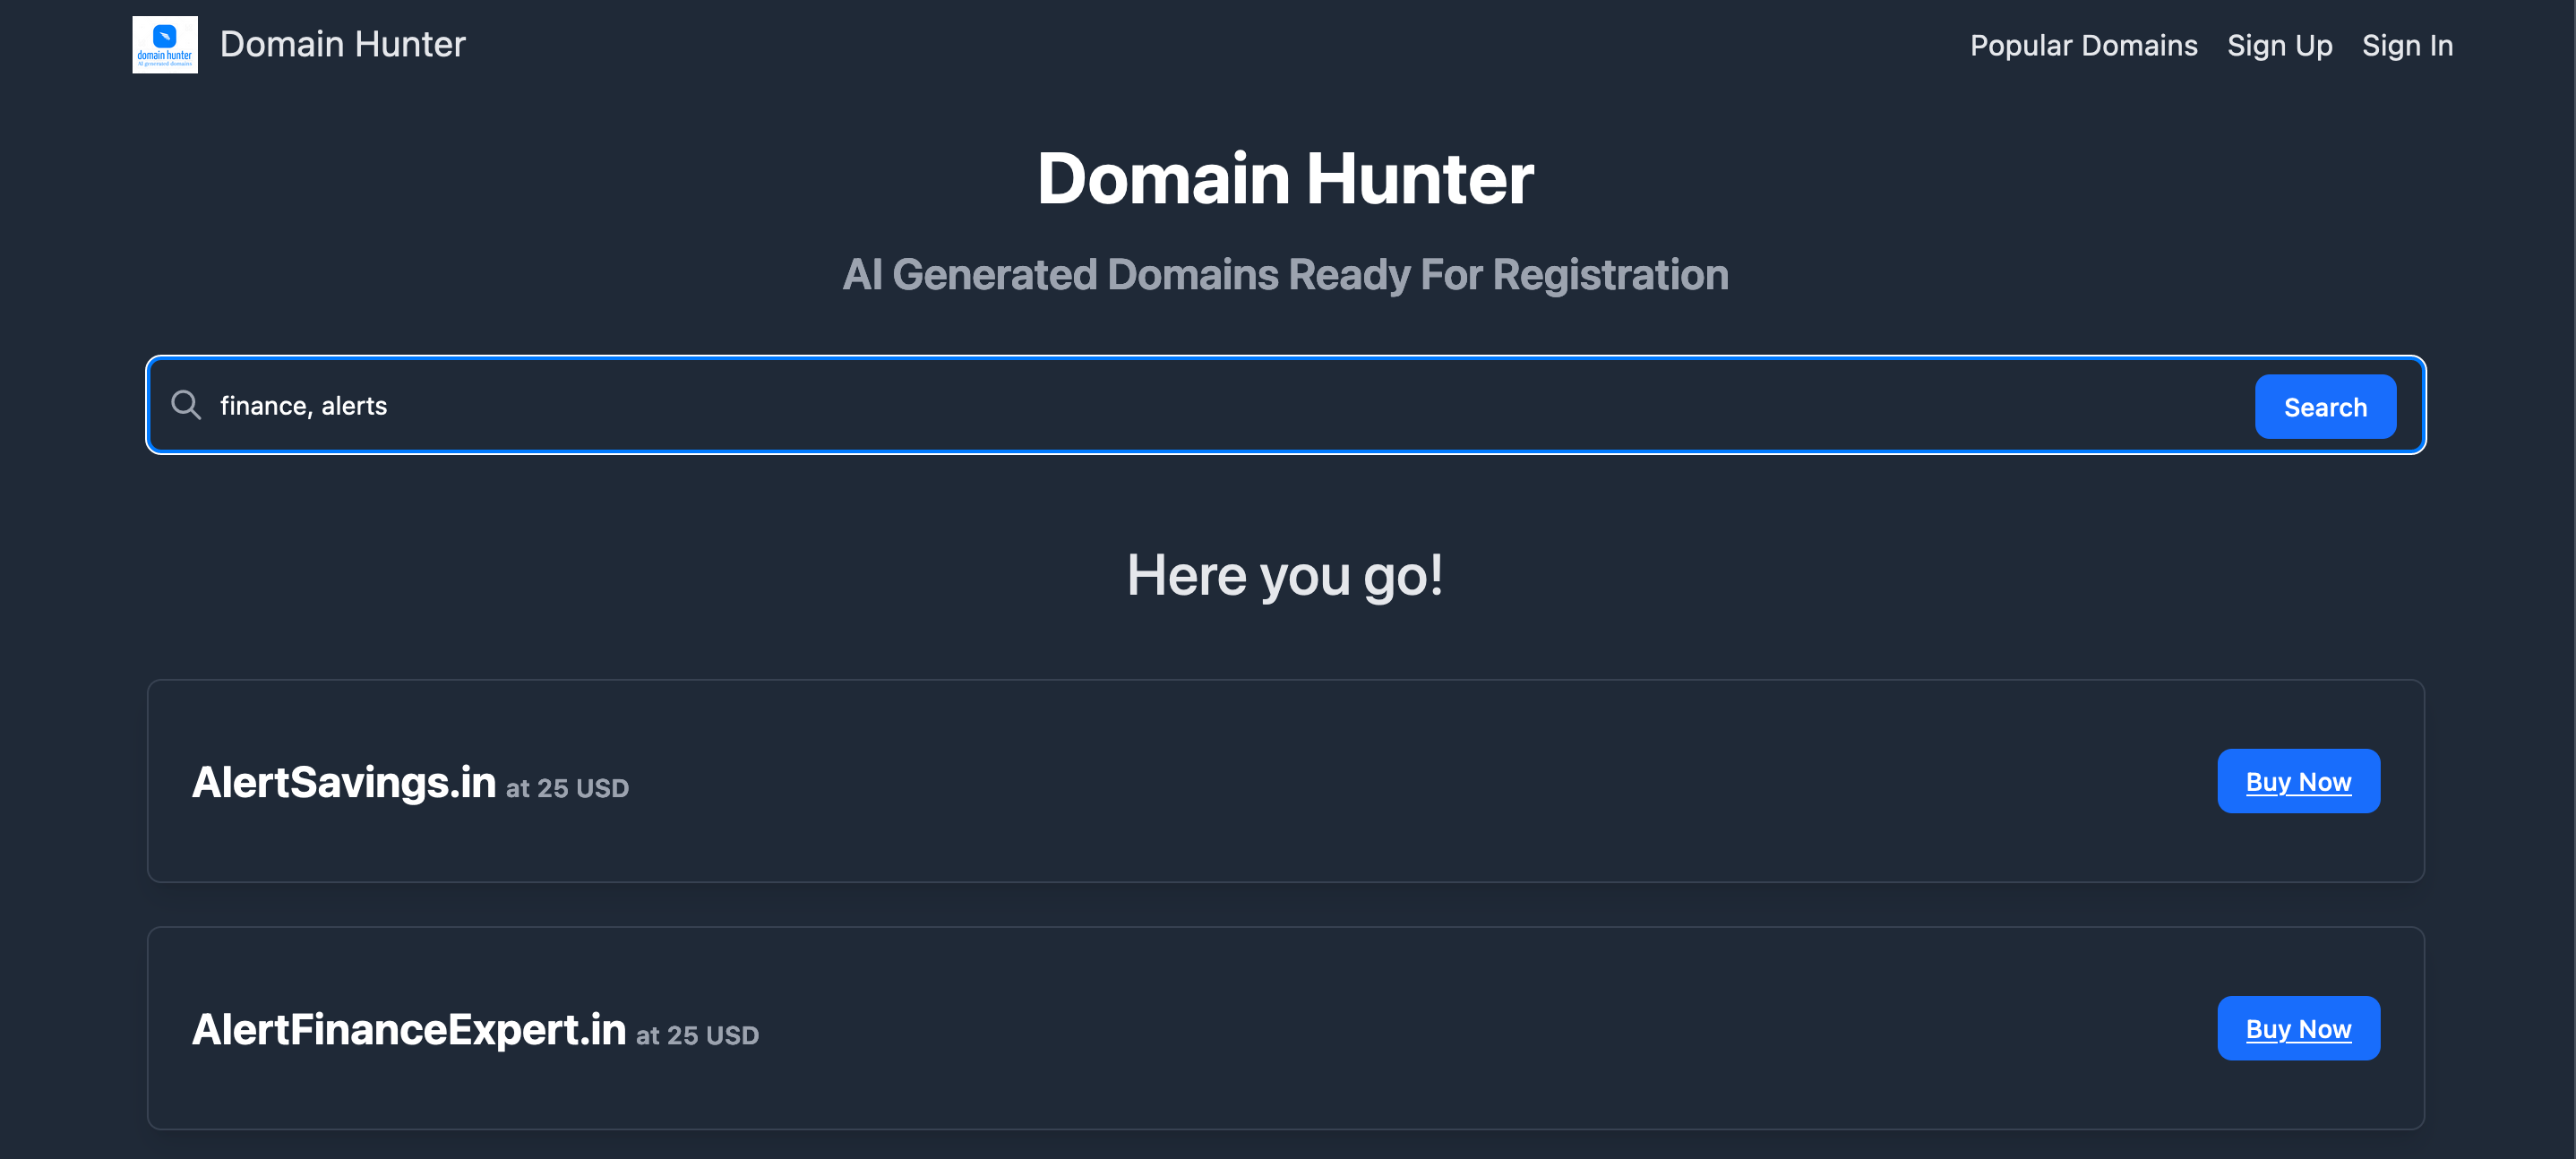 An image showing domain hunter homepage